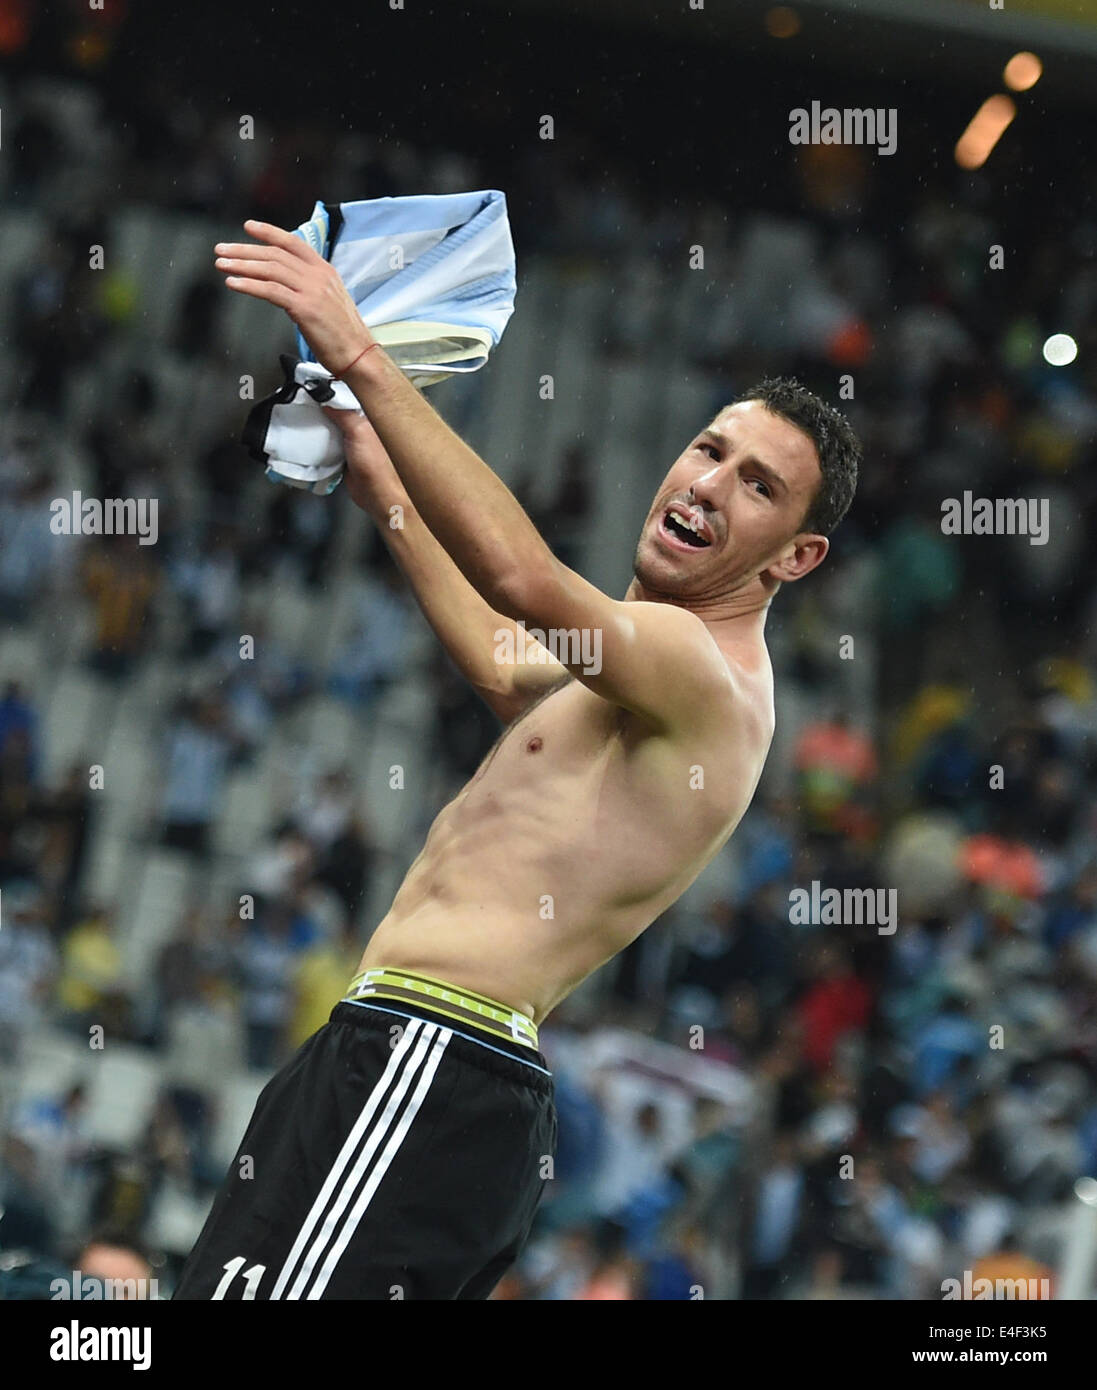 Sao Paulo, Brazil. 09th July, 2014. Argentina's Maxi Rodriguez celebrates after winning the penalty shoot-out of the FIFA World Cup 2014 semi-final soccer match between the Netherlands and Argentina at the Arena Corinthians in Sao Paulo, Brazil, 09 July 2014. Photo: Marius Becker/dpa/Alamy Live News Stock Photo